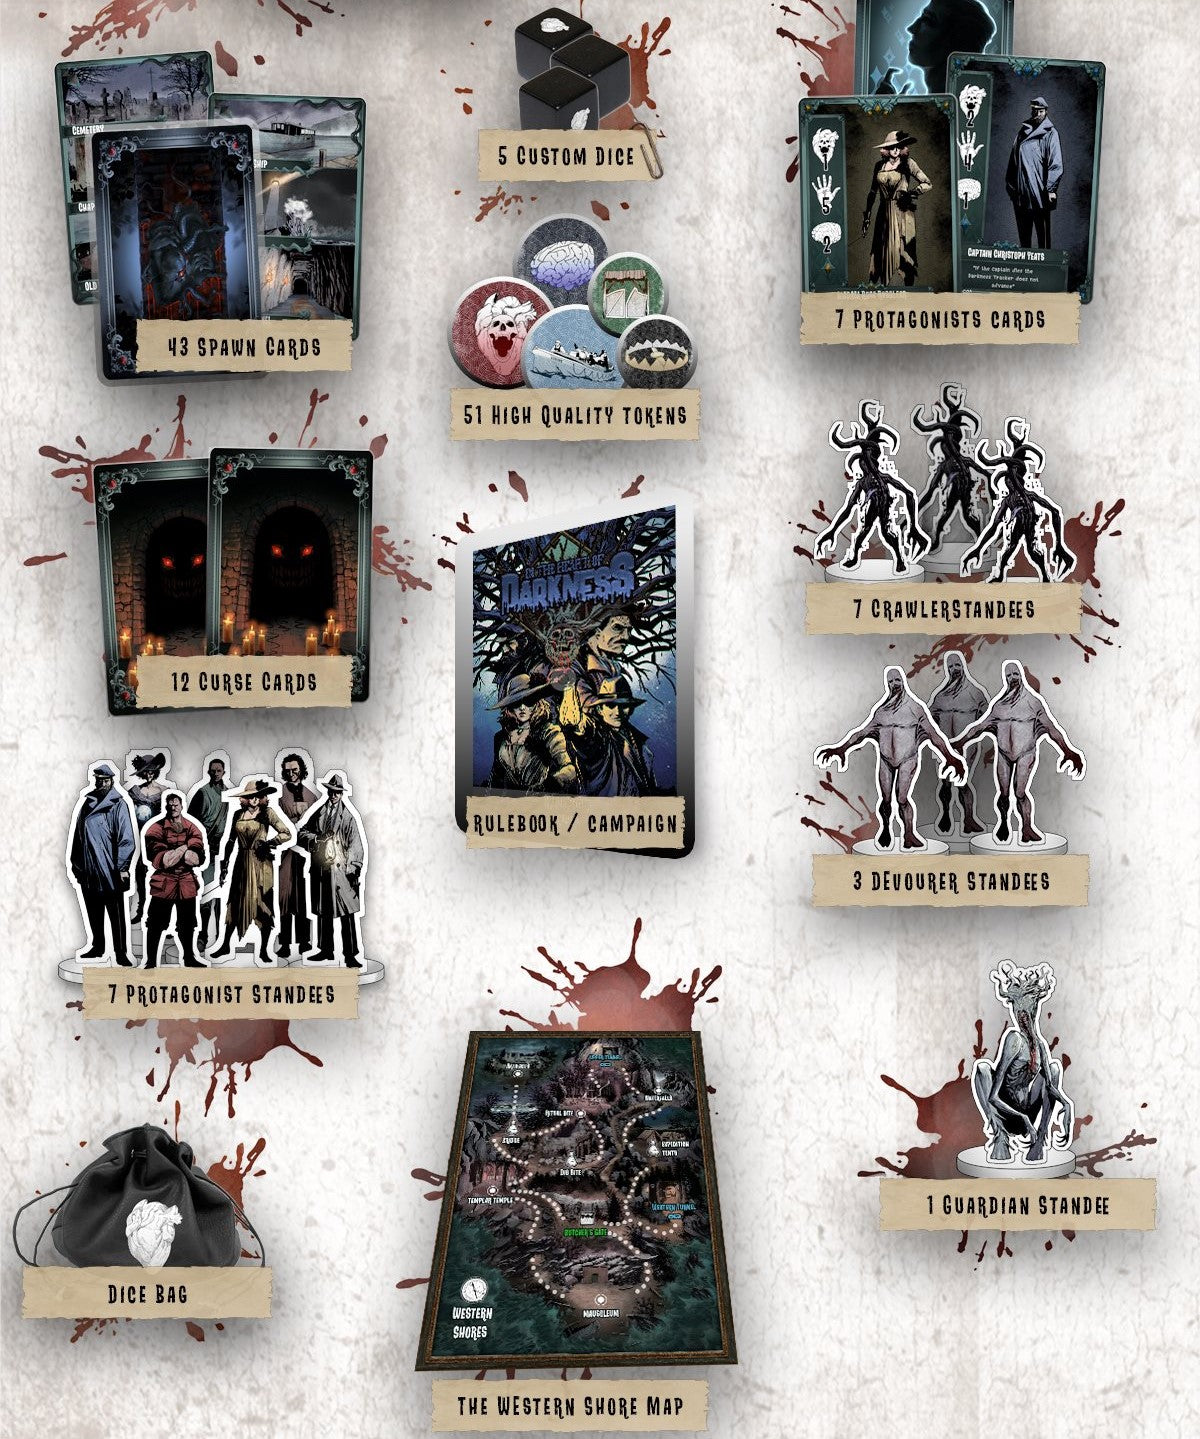 In the Heart of Darkness + Stretch Goals+ KS Exclusives English